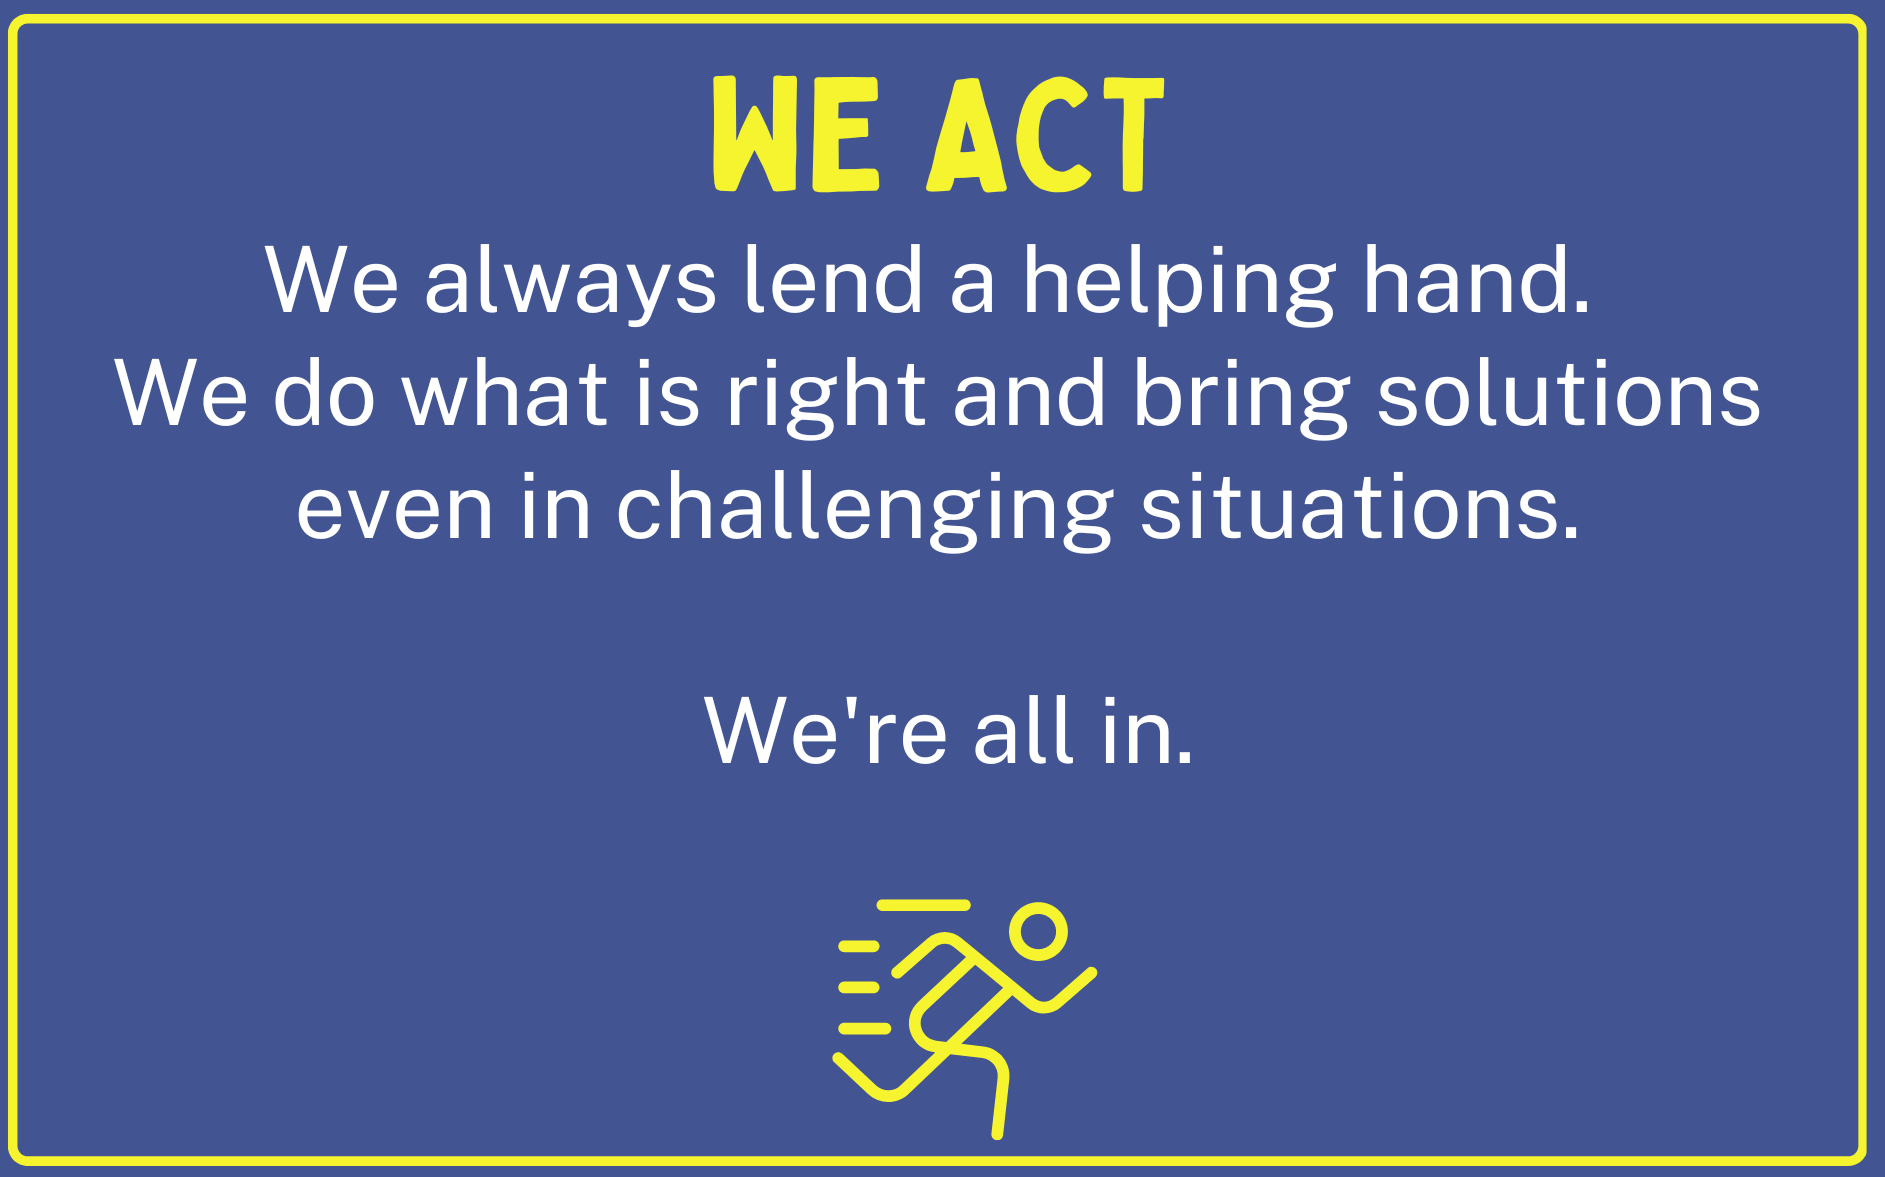 We Act. We always lend a helping hand. We do what is right and bring solutions even in challenging situations. We're all in.